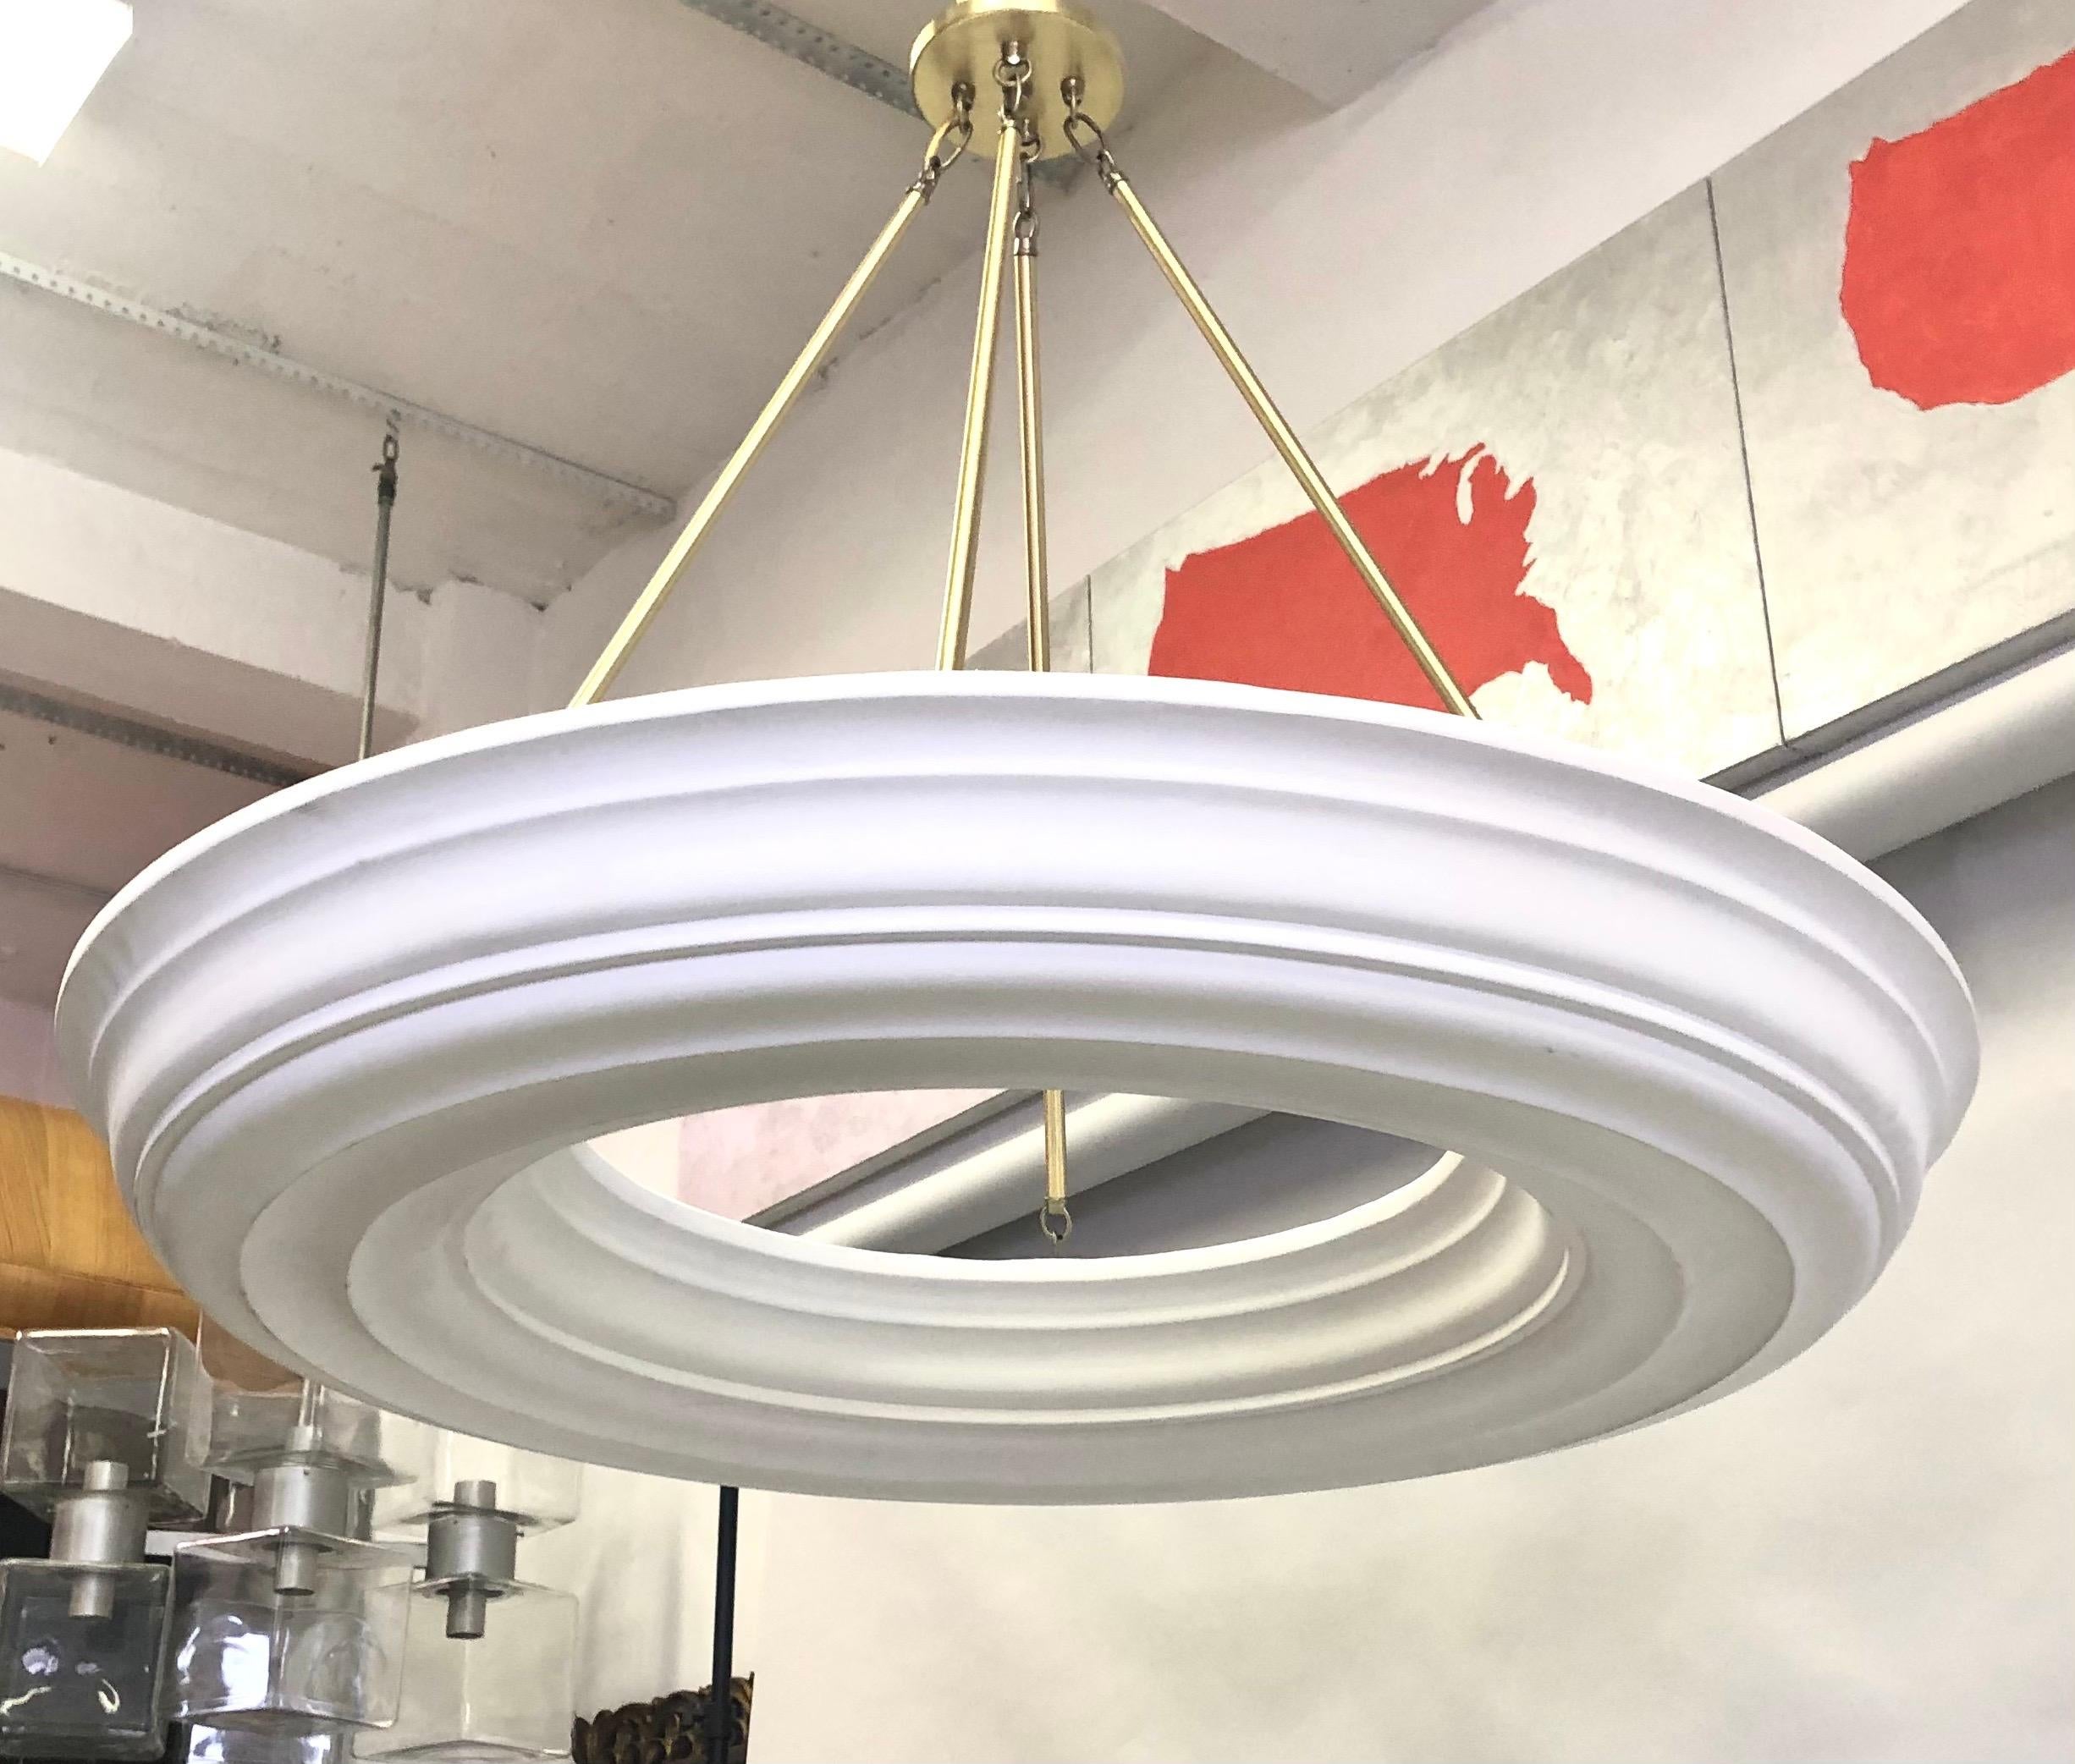 French Mid-Century Modern neoclassical plaster chandelier in the style of Serge Roche. The plaster disc has an open center and is suspended from 4 brass rods and canopy. The brass mounting hardware is adaptable to any height including flush mount